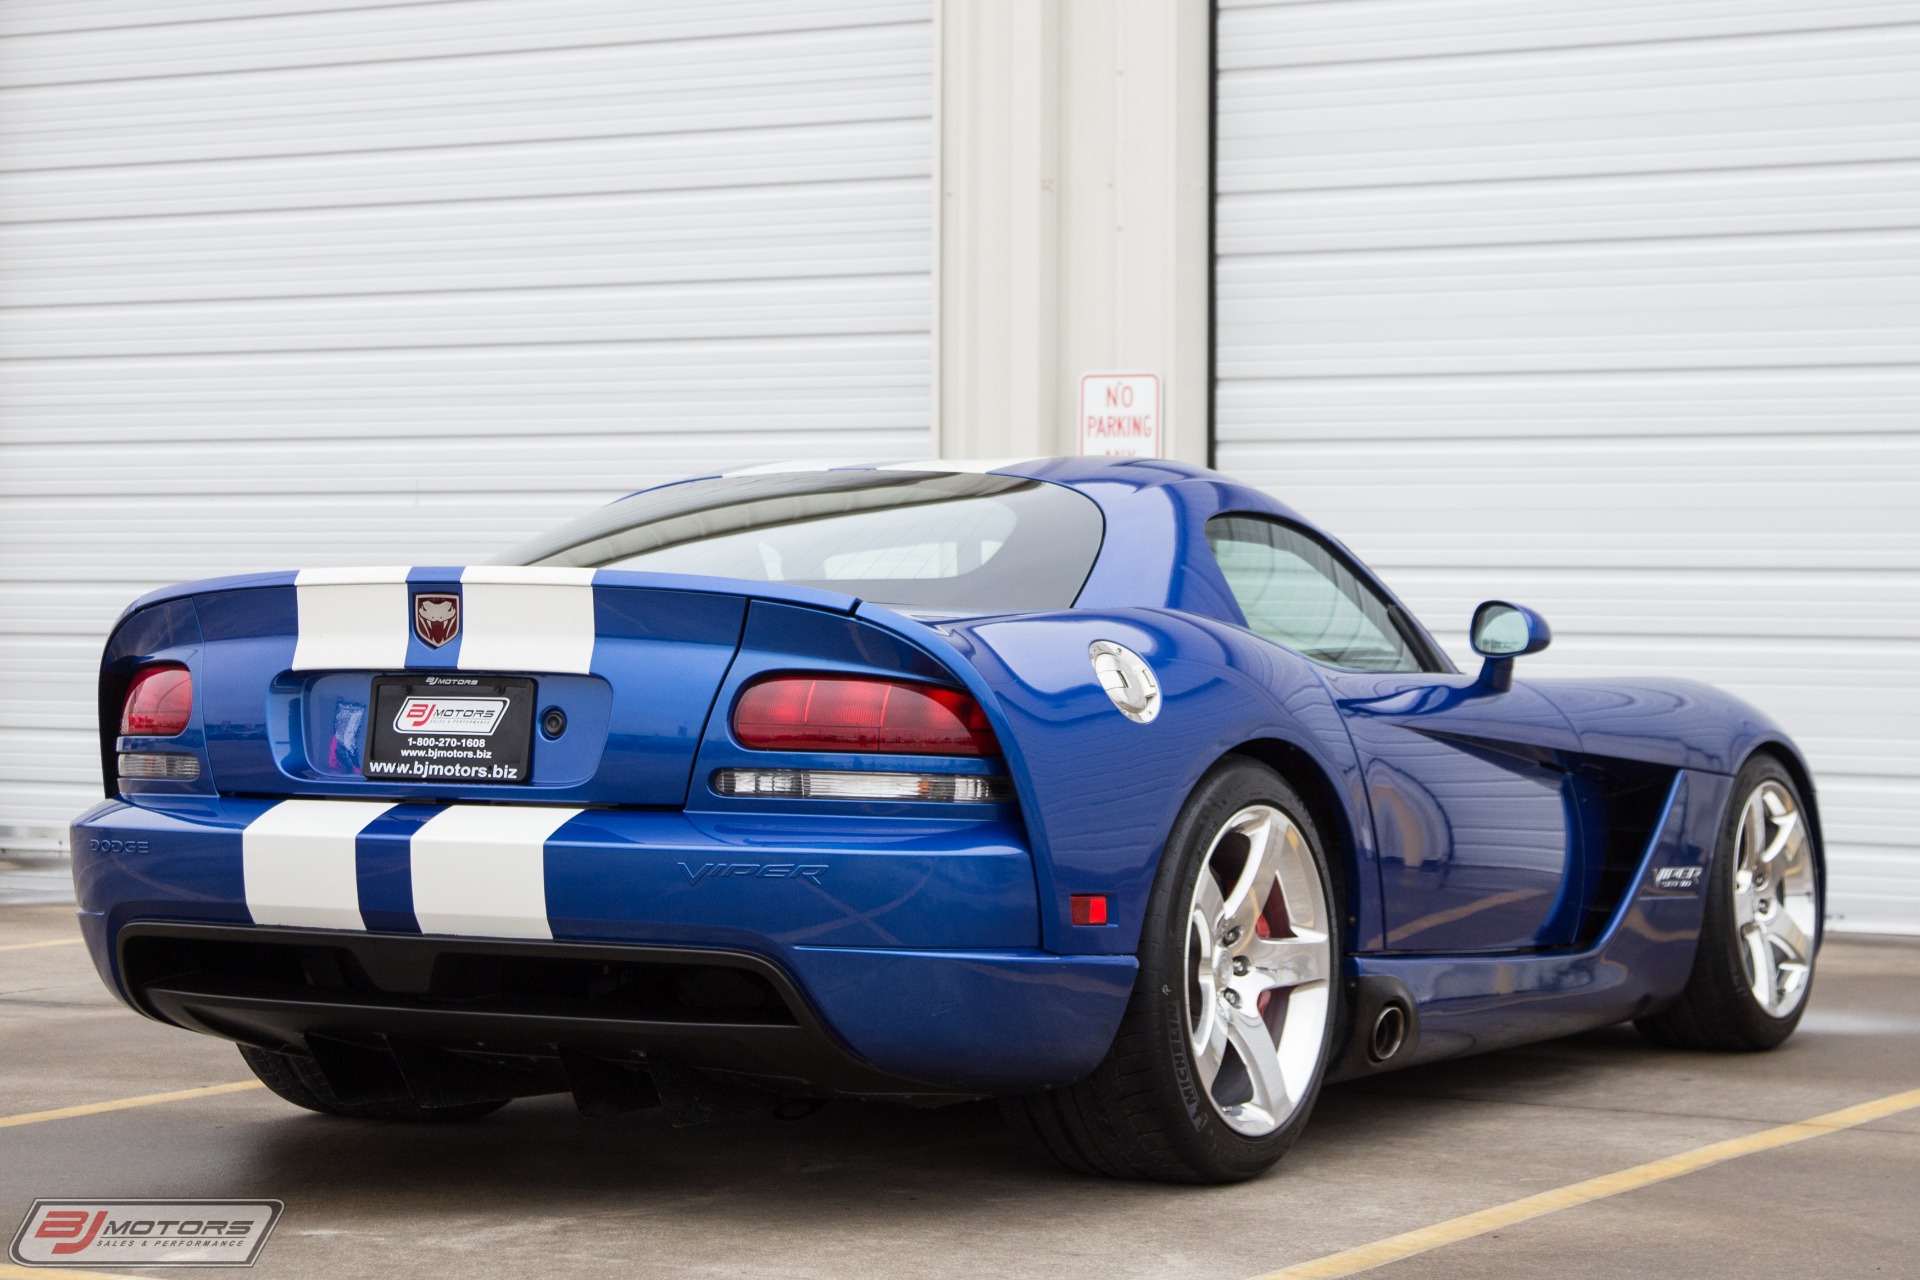 Used 2006 Dodge Viper Srt 10 First Edition For Sale Special Pricing